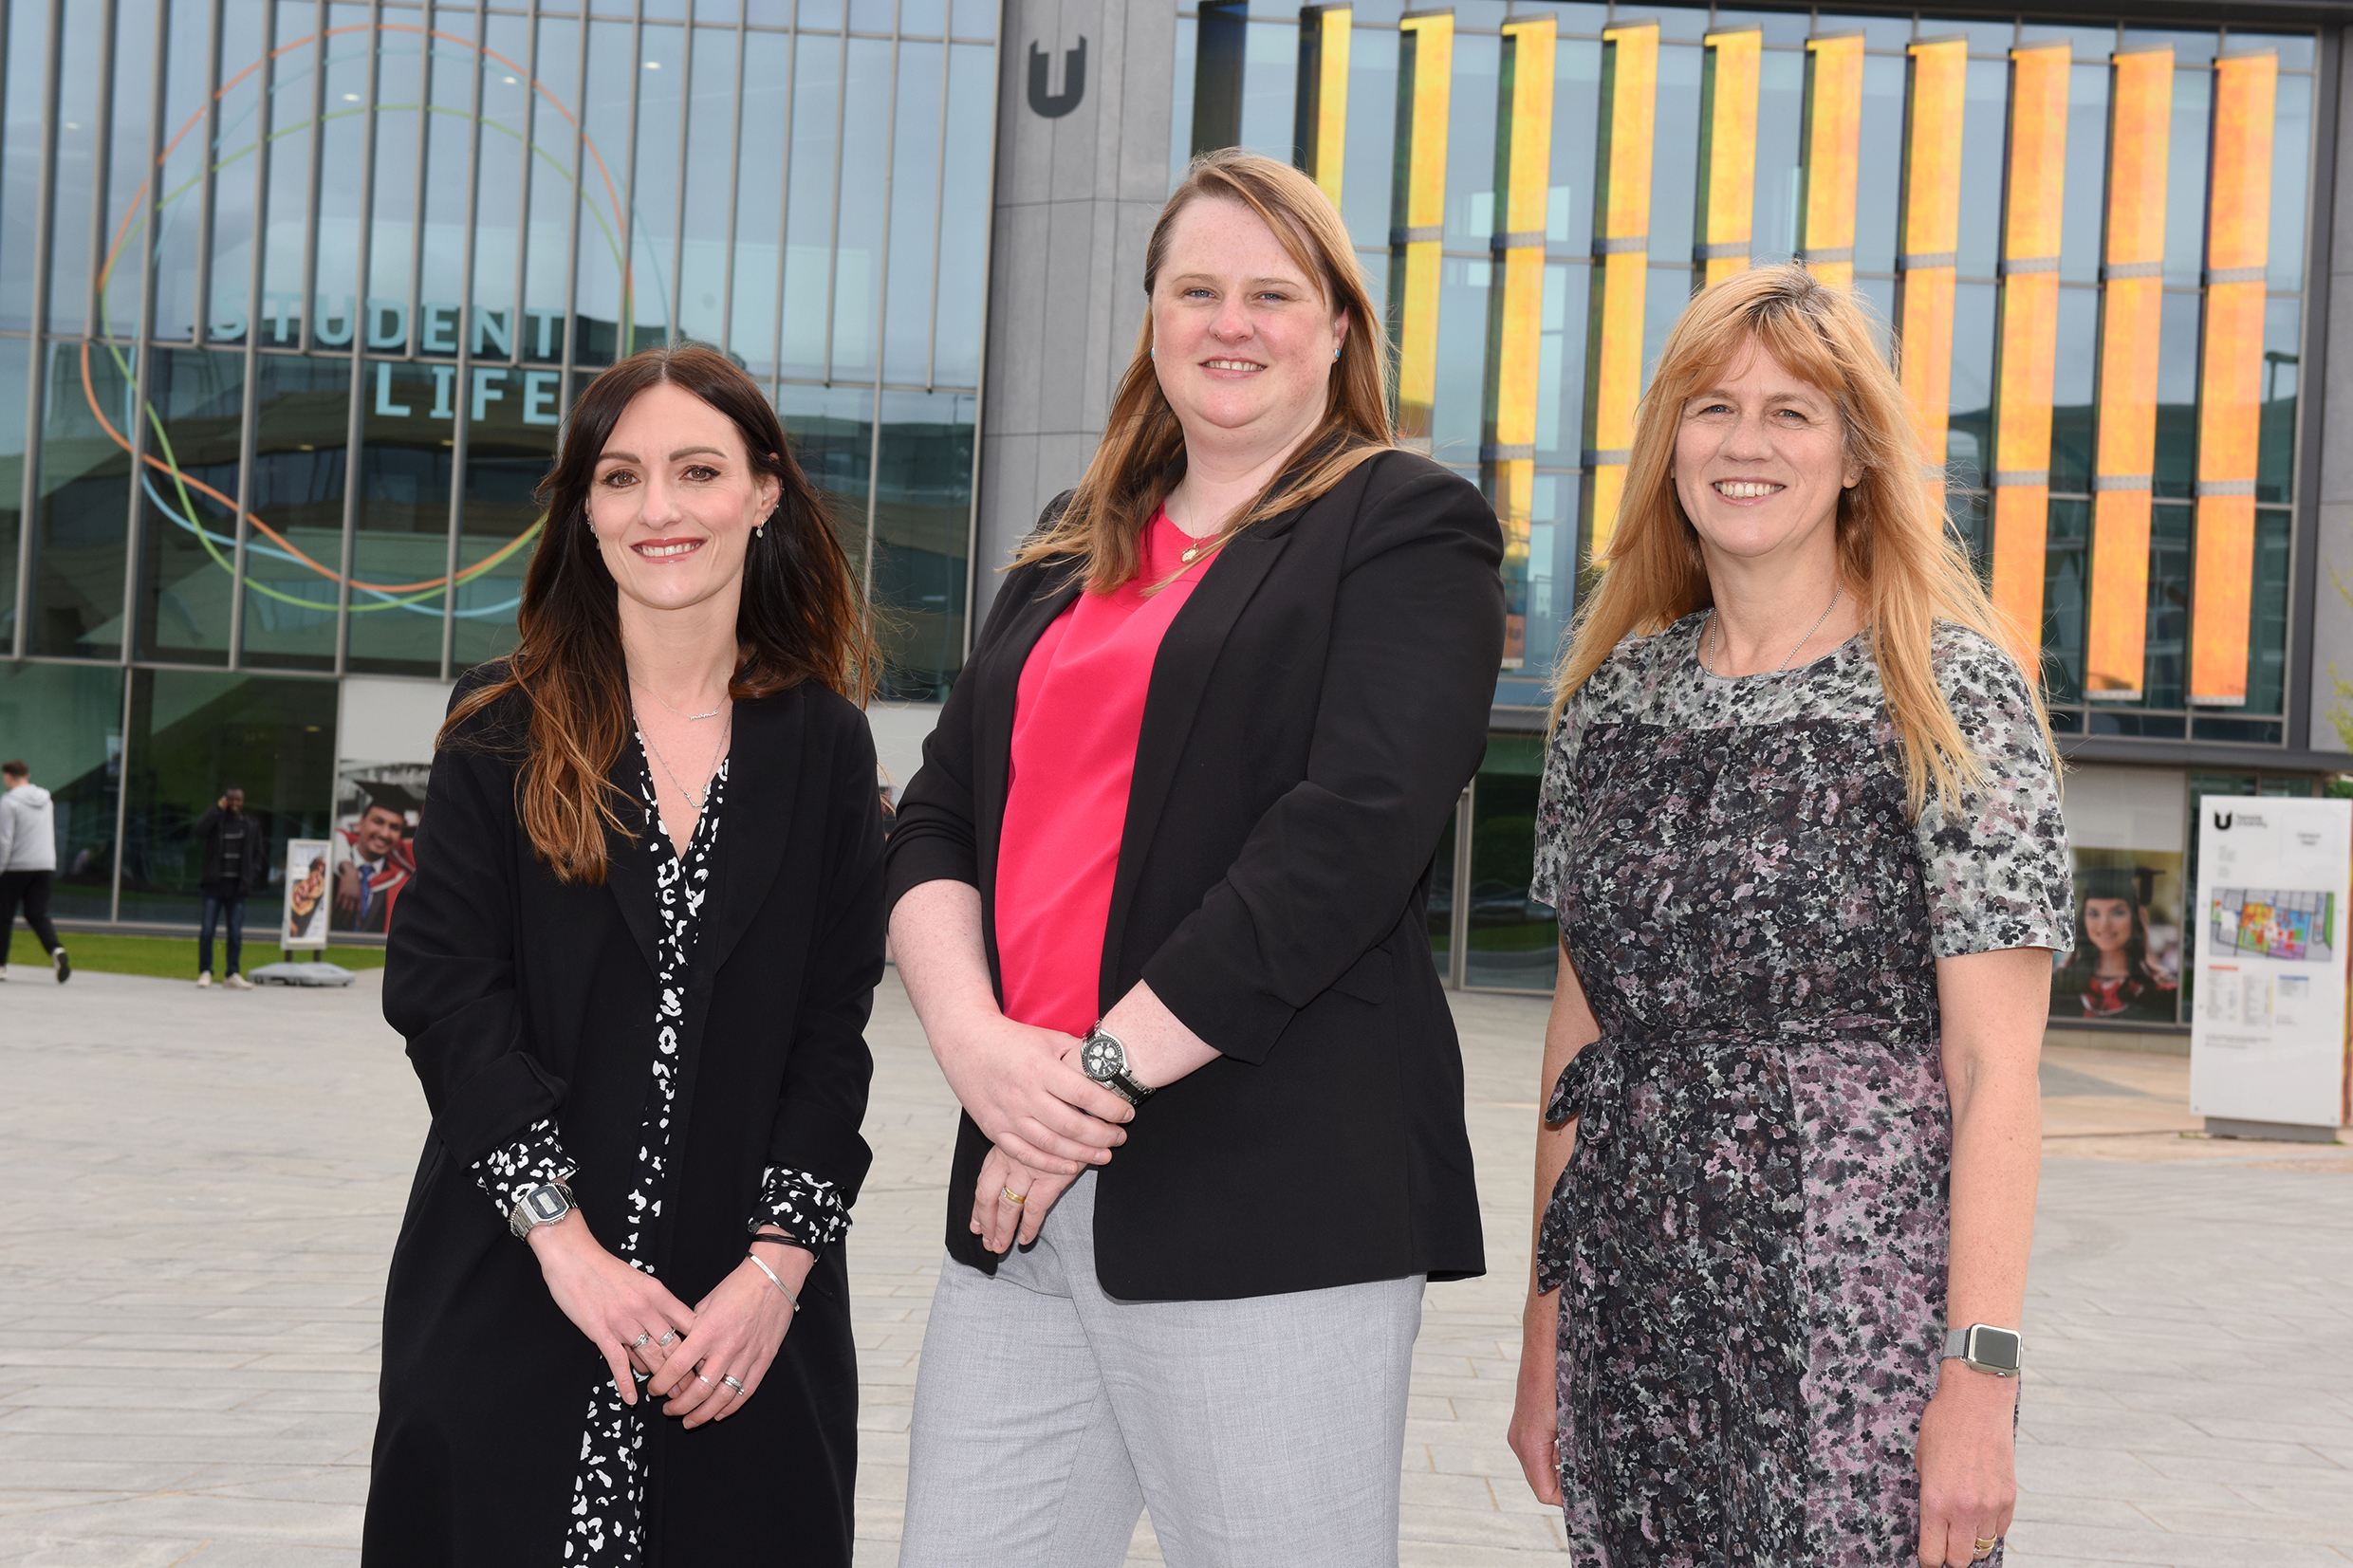 Local law firm to invest in aspiring legal professionals at Teesside University